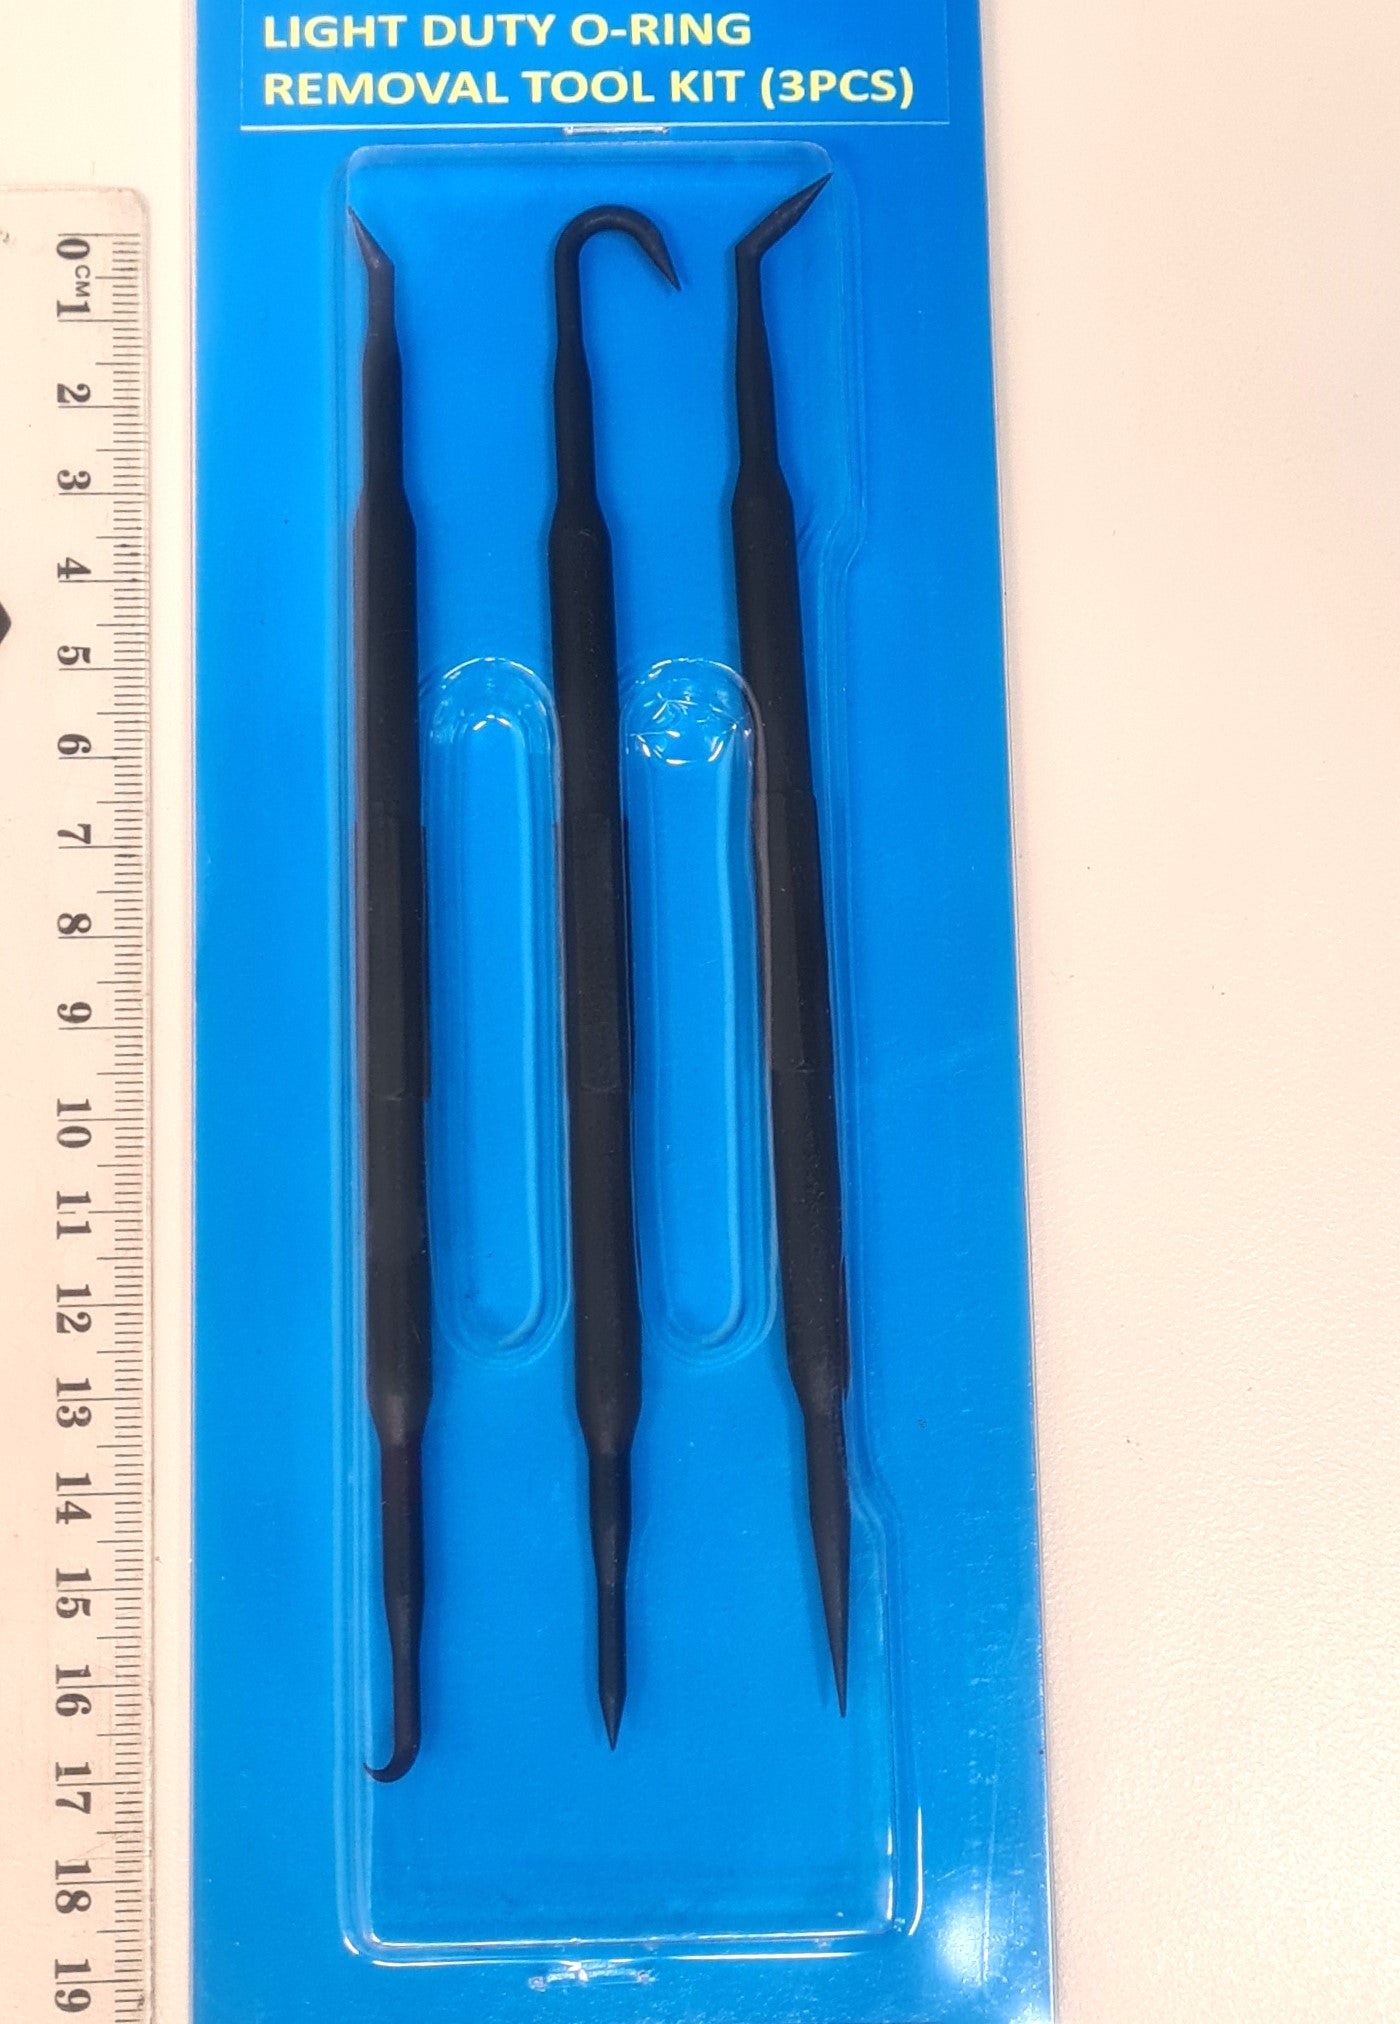 Double ended Hook and Pick Set. Non scratch plastic tools for applications where different hook and pick shapes are required 